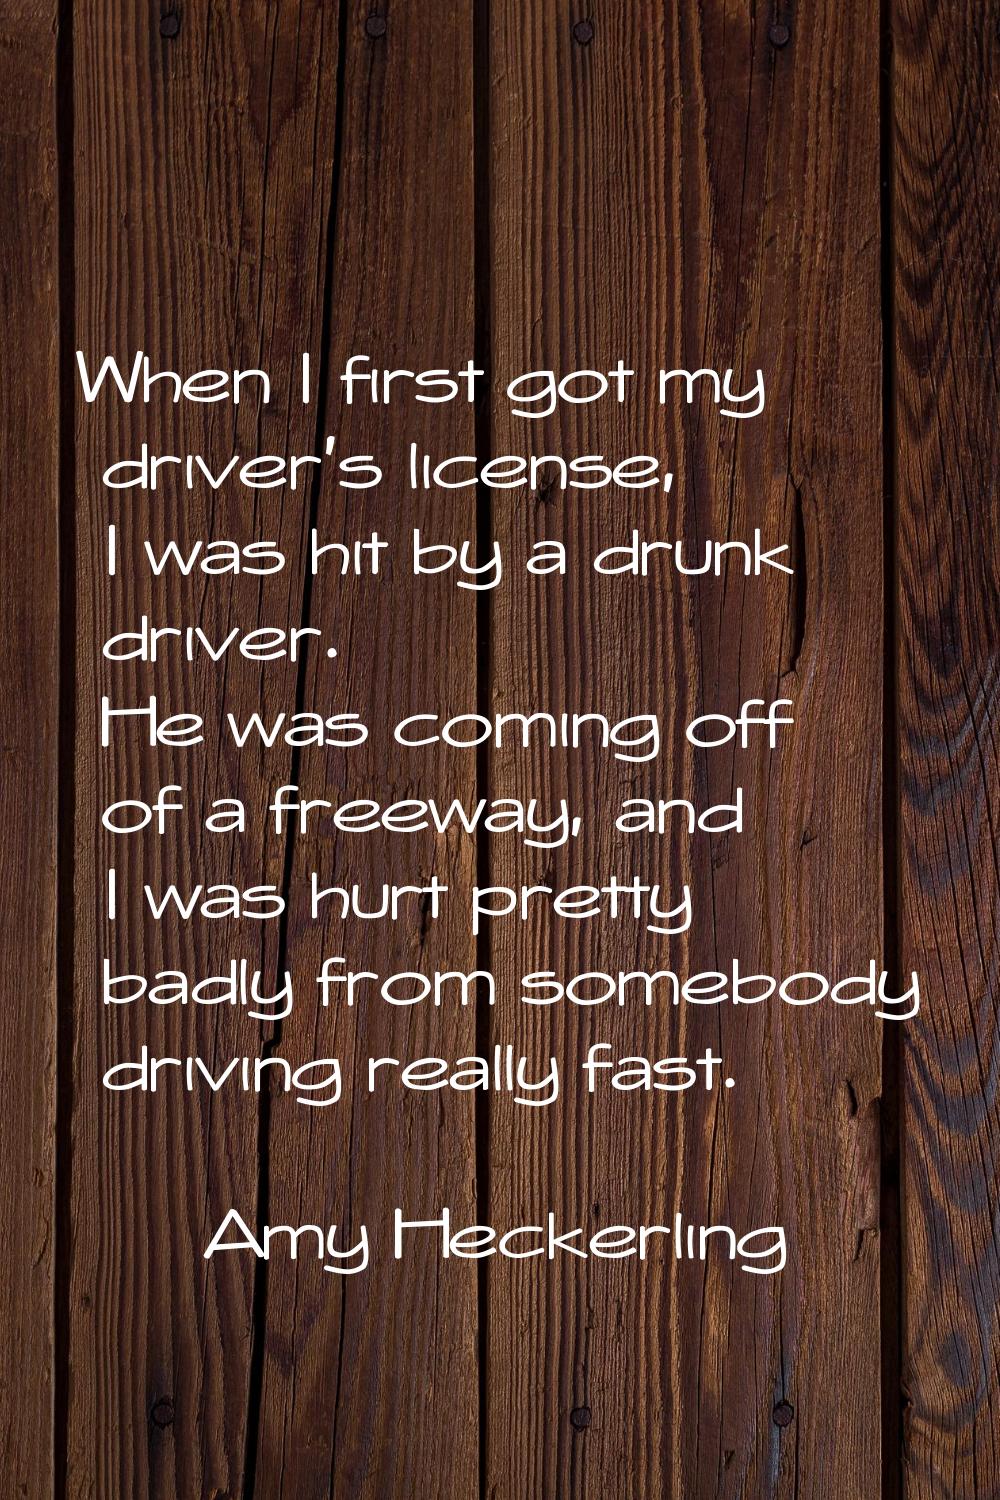 When I first got my driver's license, I was hit by a drunk driver. He was coming off of a freeway, 